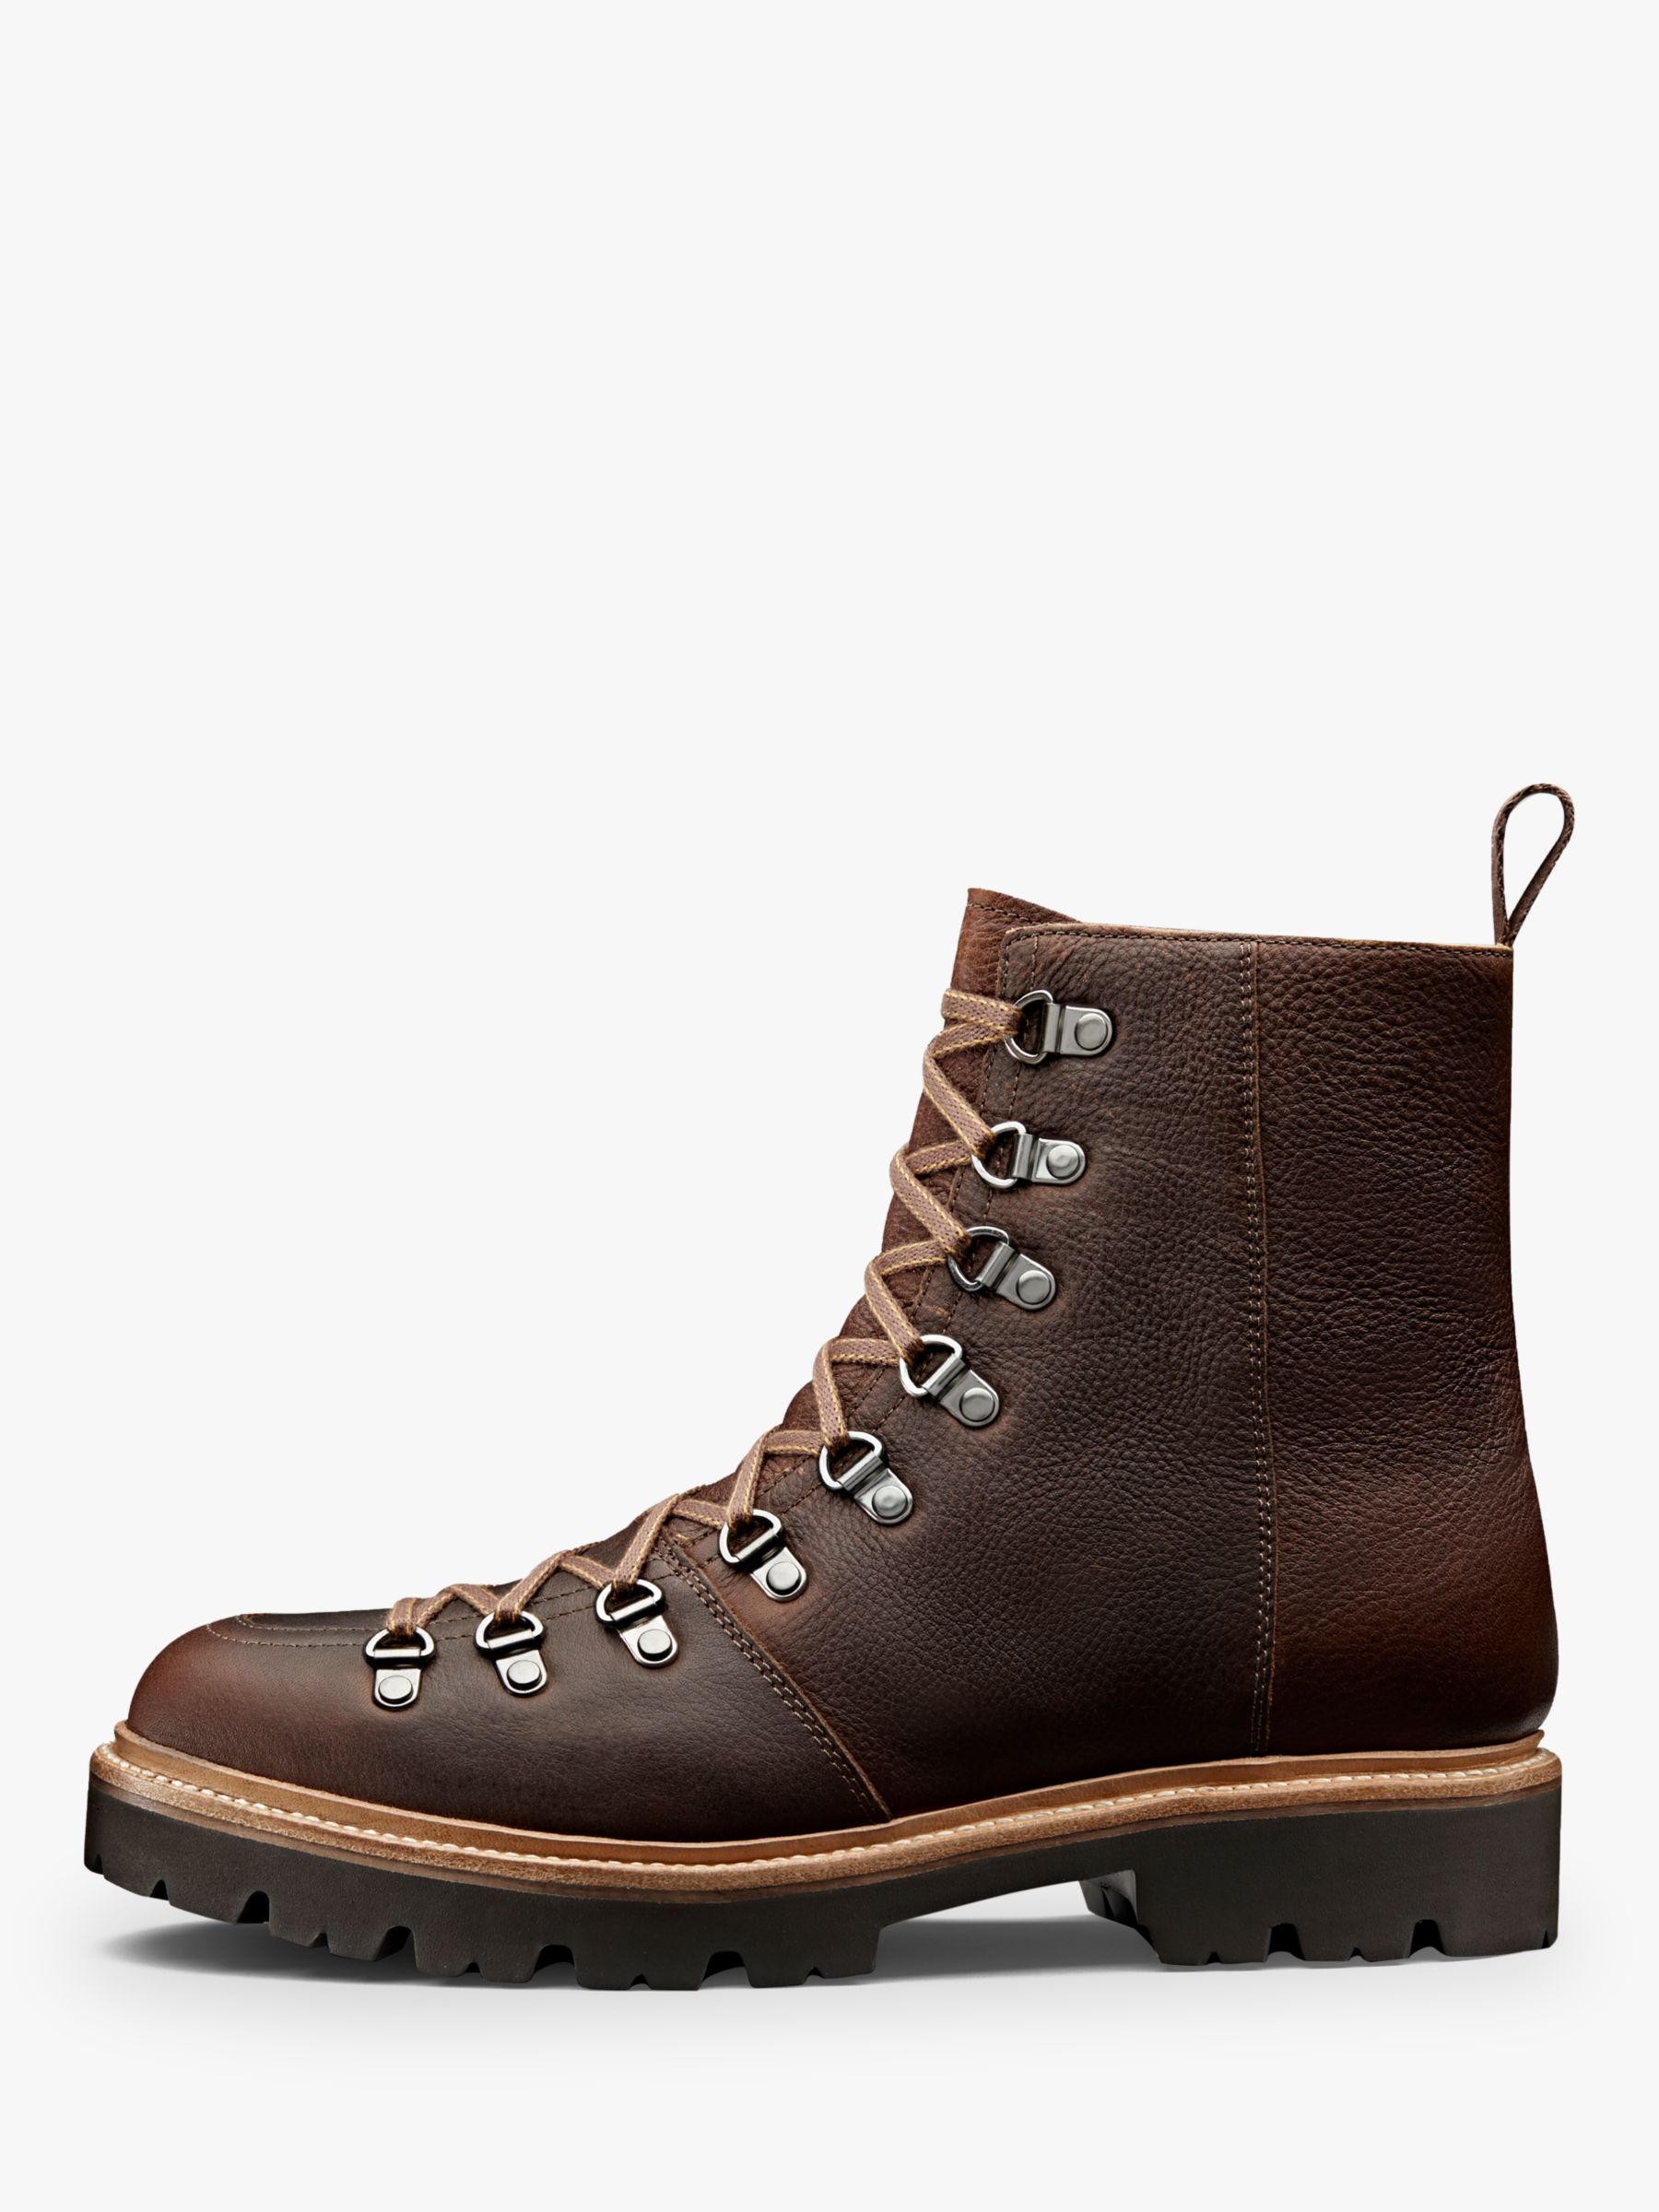 Grenson Brady Hiker Boots, Brown at 